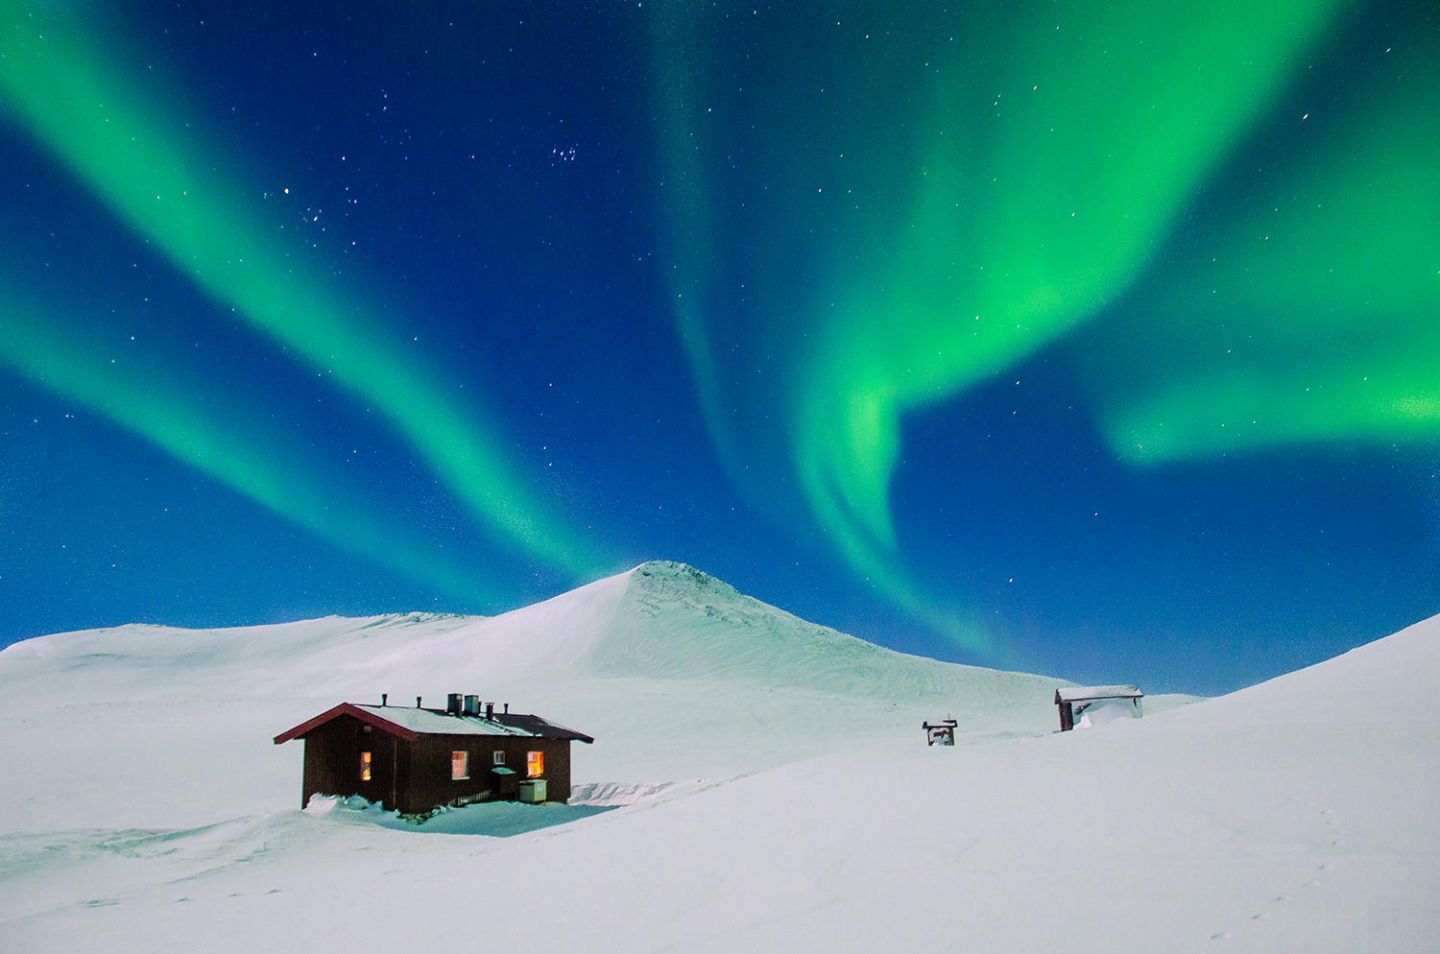 Auroras over a cabin in Lapland